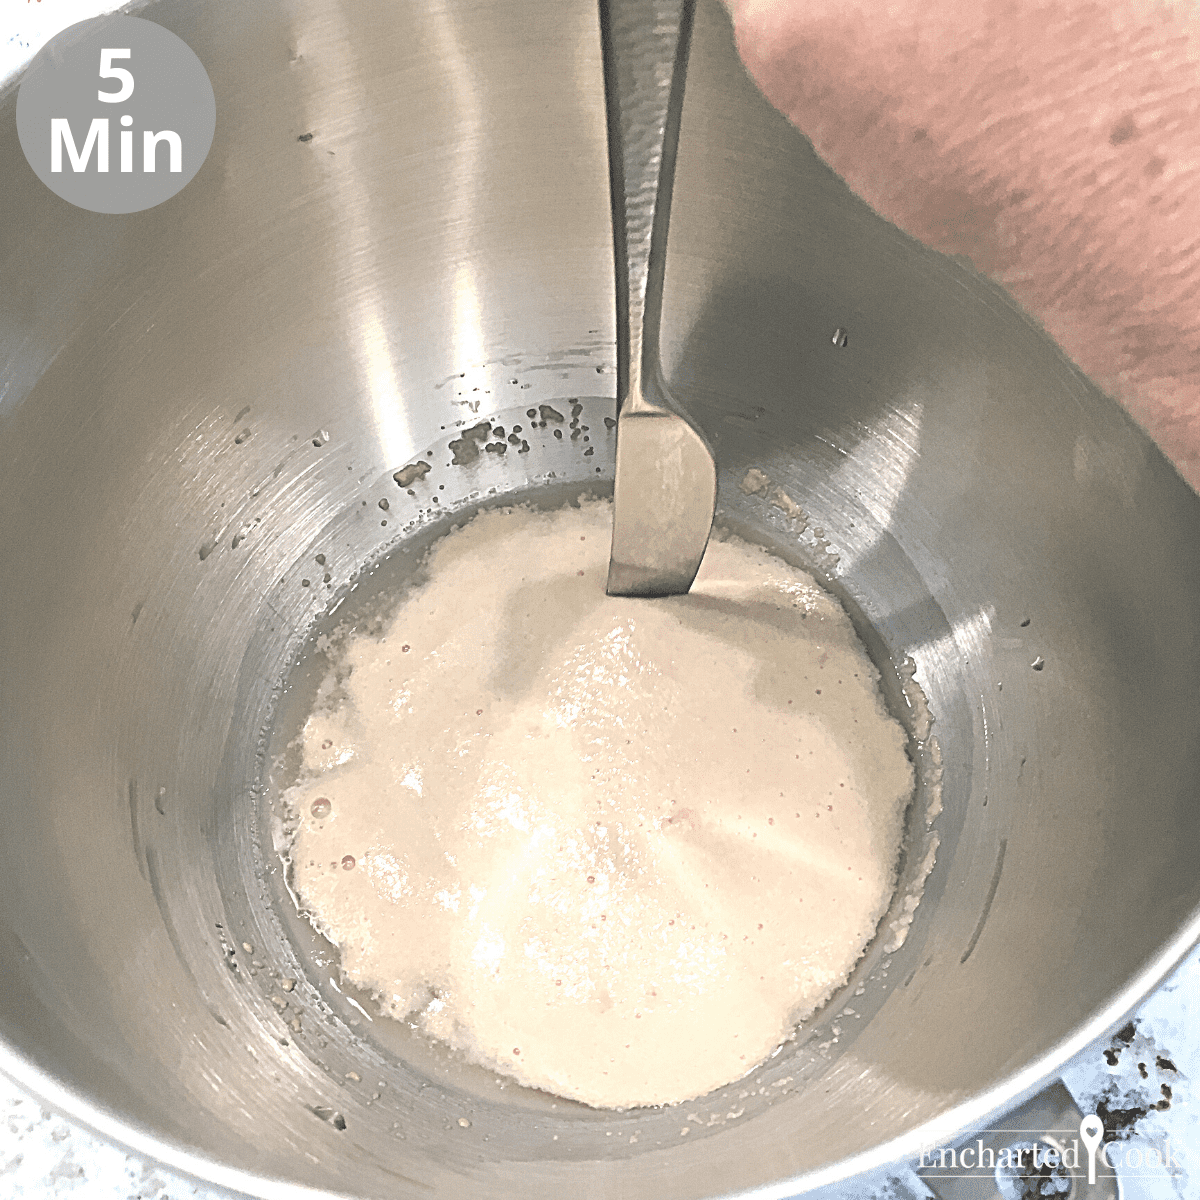 Water, yeast, and sugar mixed together in a stand mixer bowl is slightly foamy. Elasped time is 5 minutes.